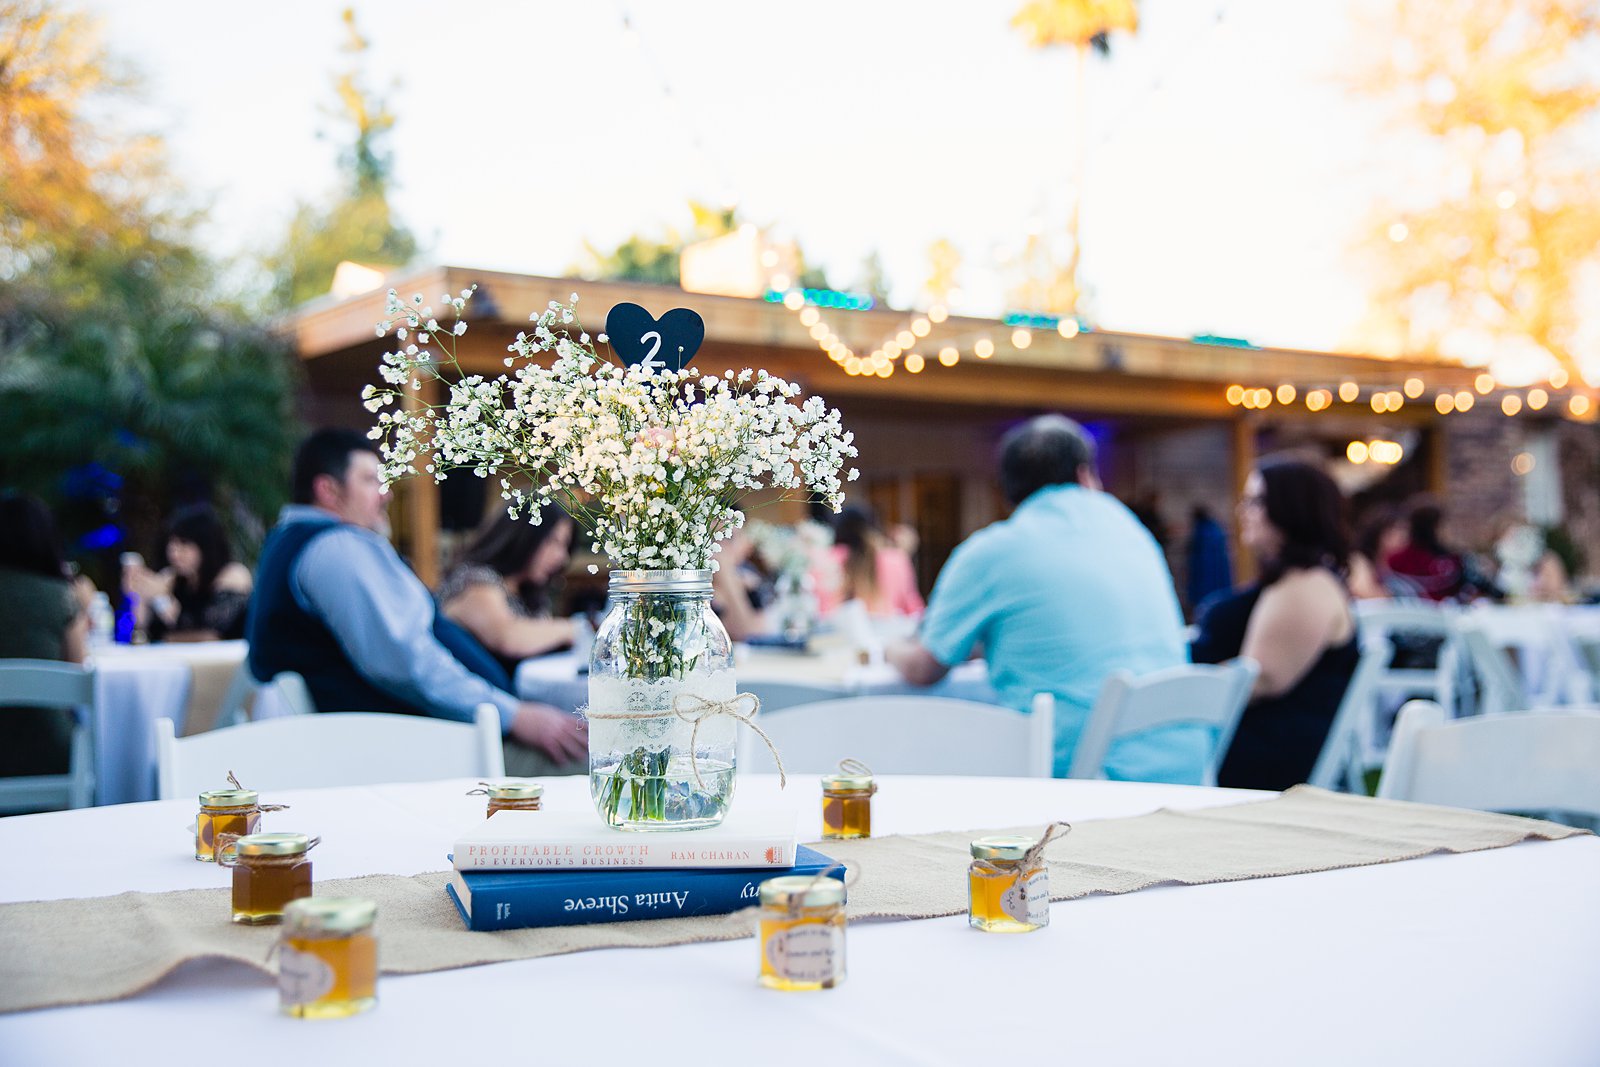 Rustic centerpieces at Schnepf Farms wedding reception by Queen Creek wedding photographer PMA Photography.